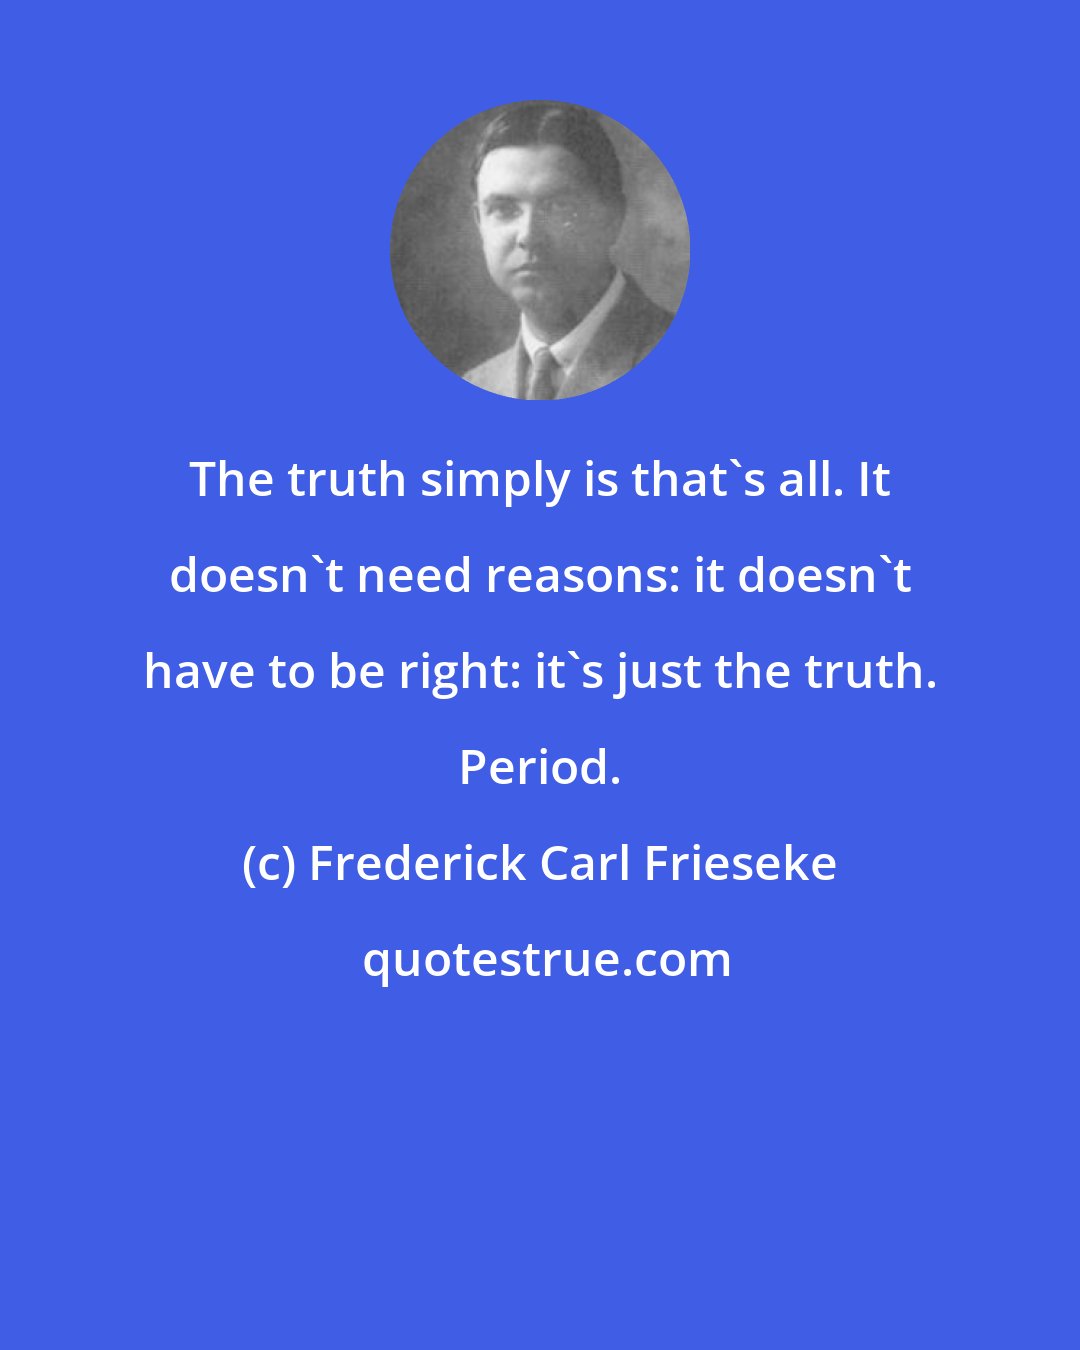 Frederick Carl Frieseke: The truth simply is that's all. It doesn't need reasons: it doesn't have to be right: it's just the truth. Period.